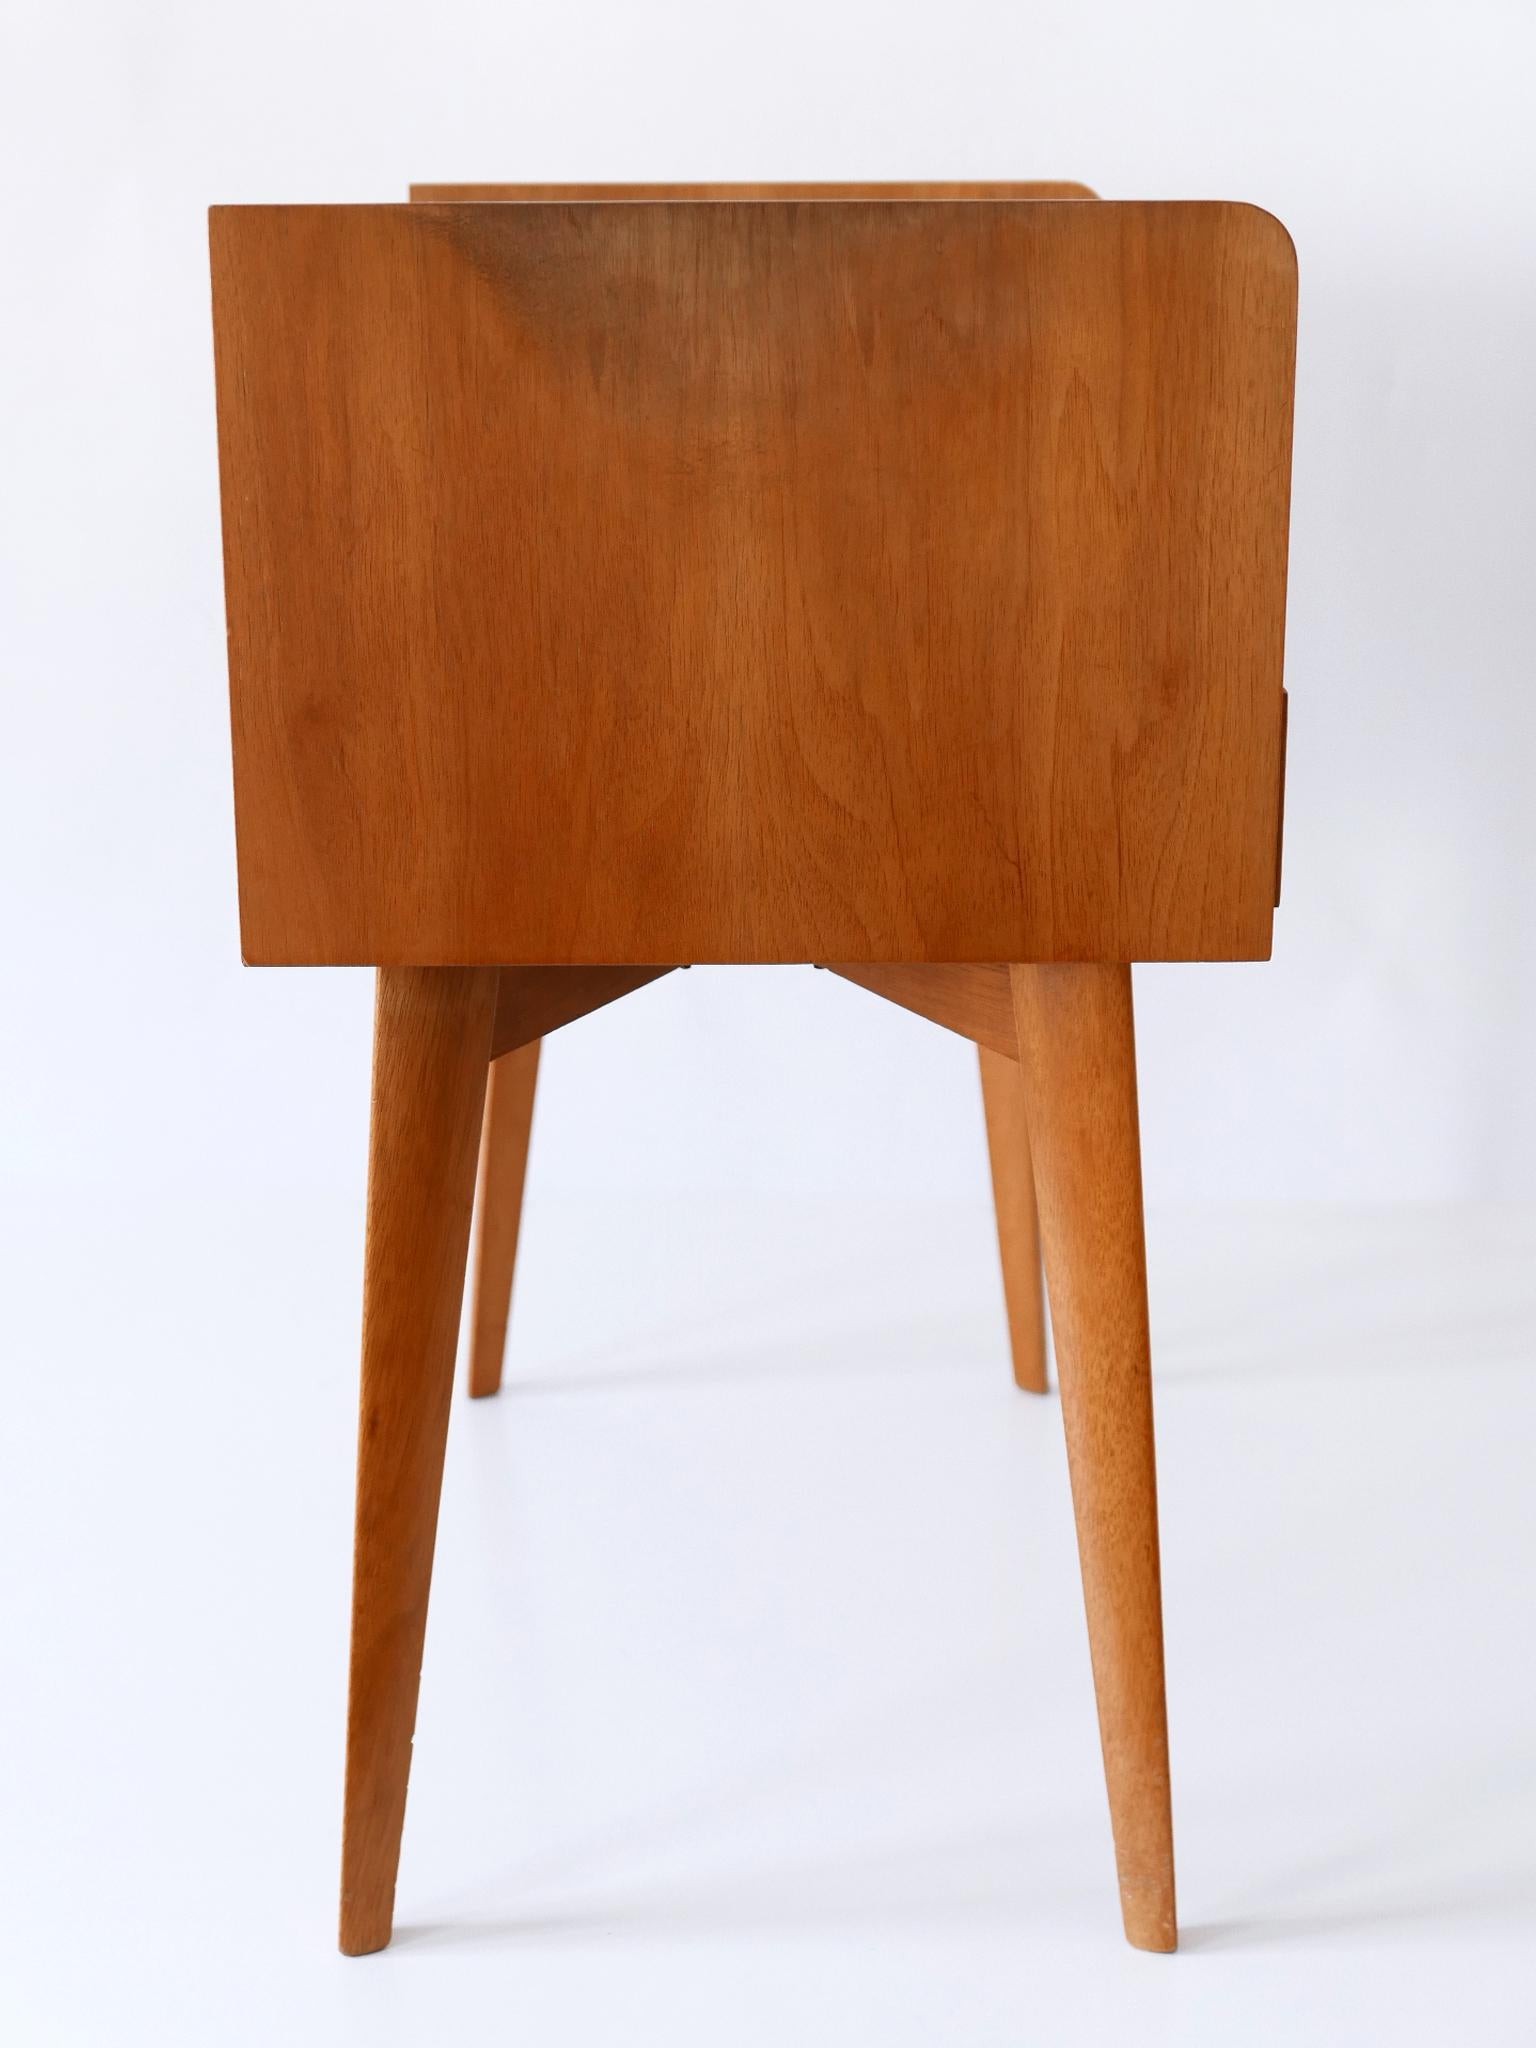 Set of Two Mid Century Modern Walnut Nightstands by WK Möbel Germany 1950s For Sale 10